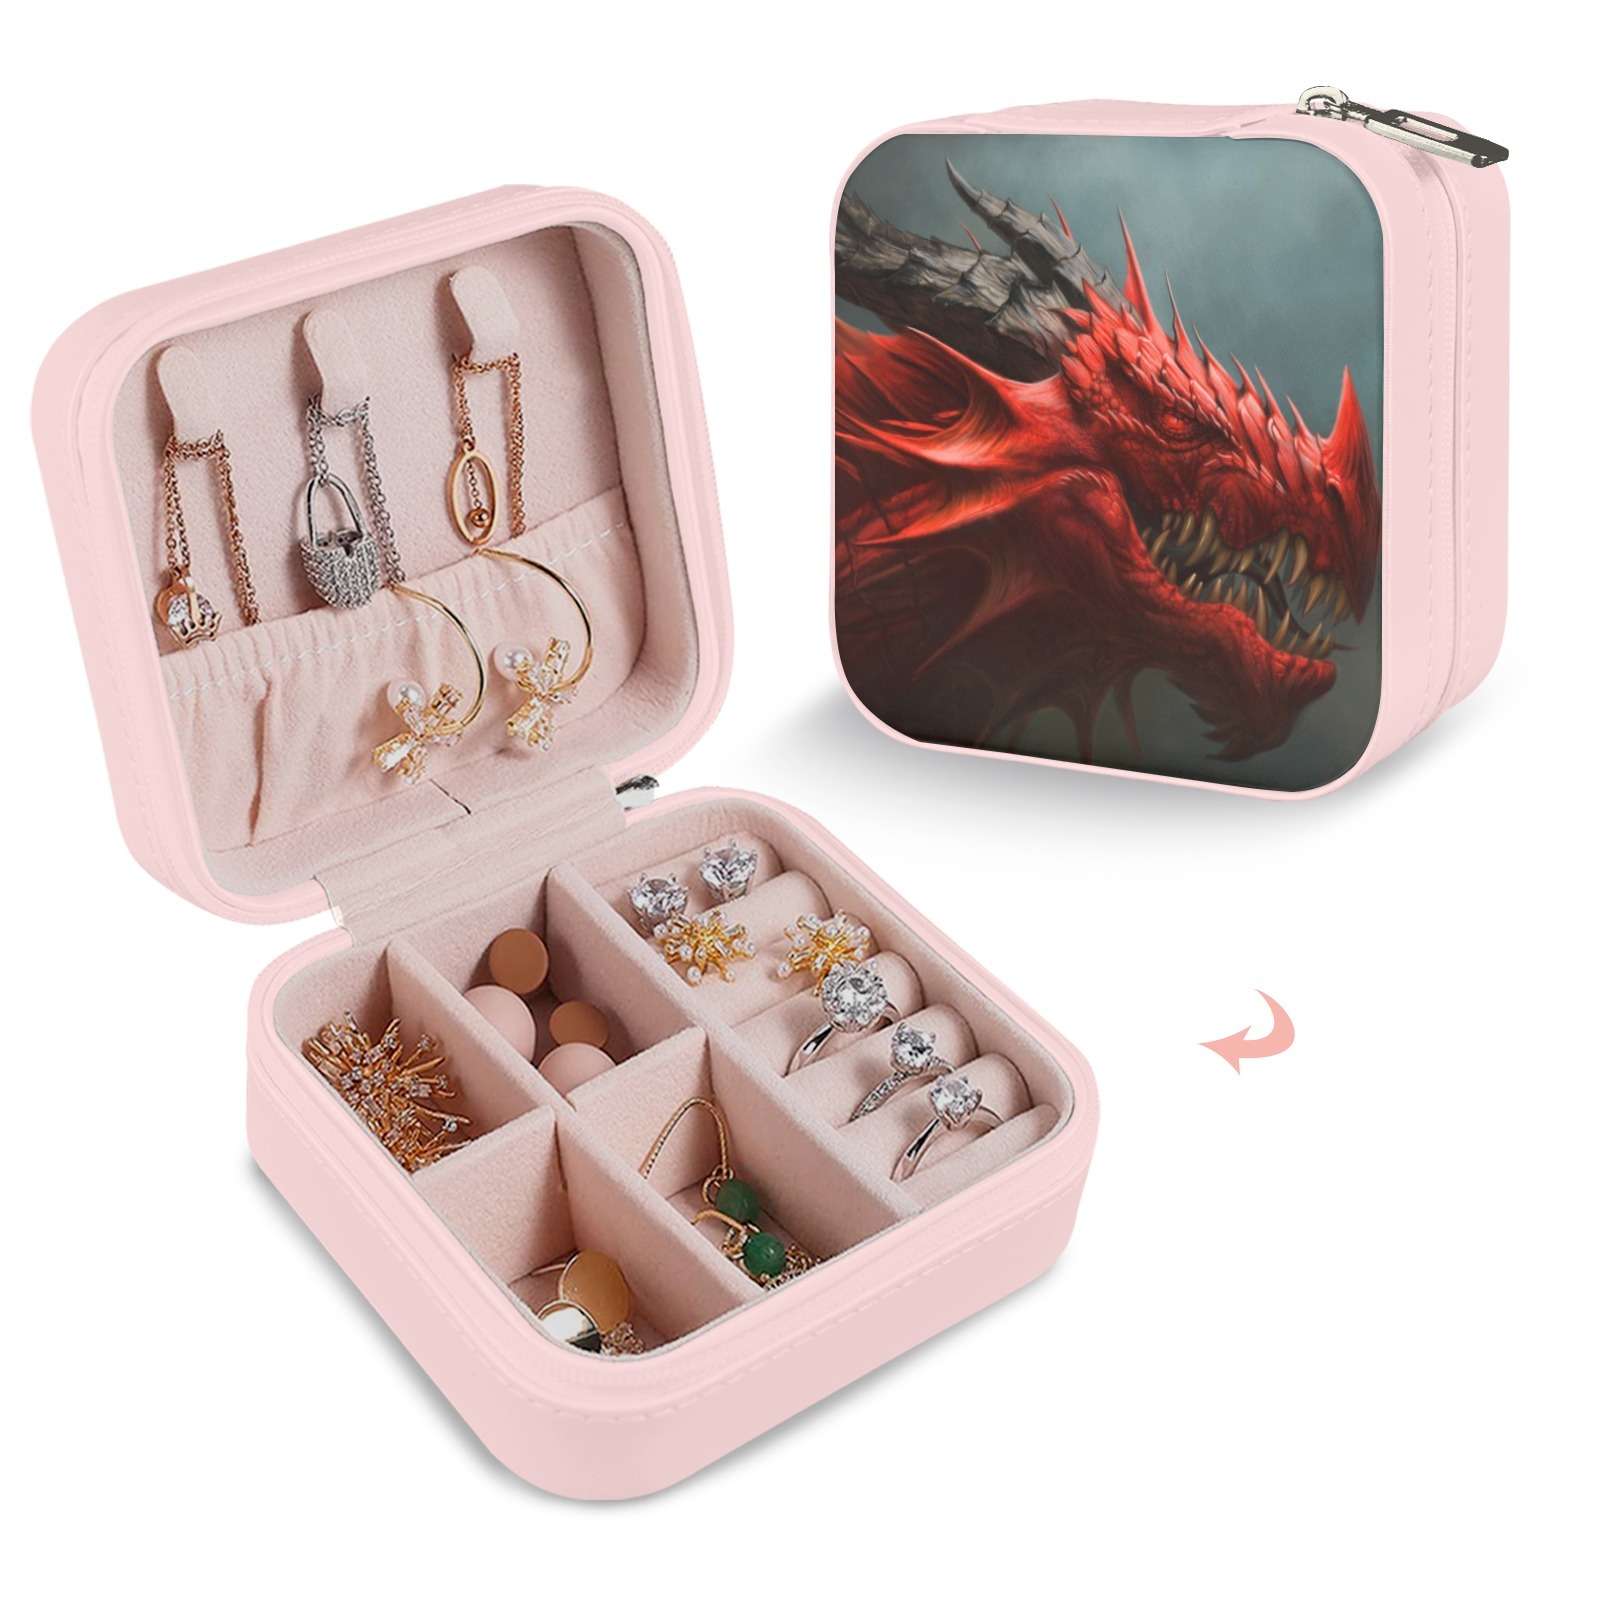 Primary image for Leather Travel Jewelry Storage Box - Portable Jewelry Organizer - Puff